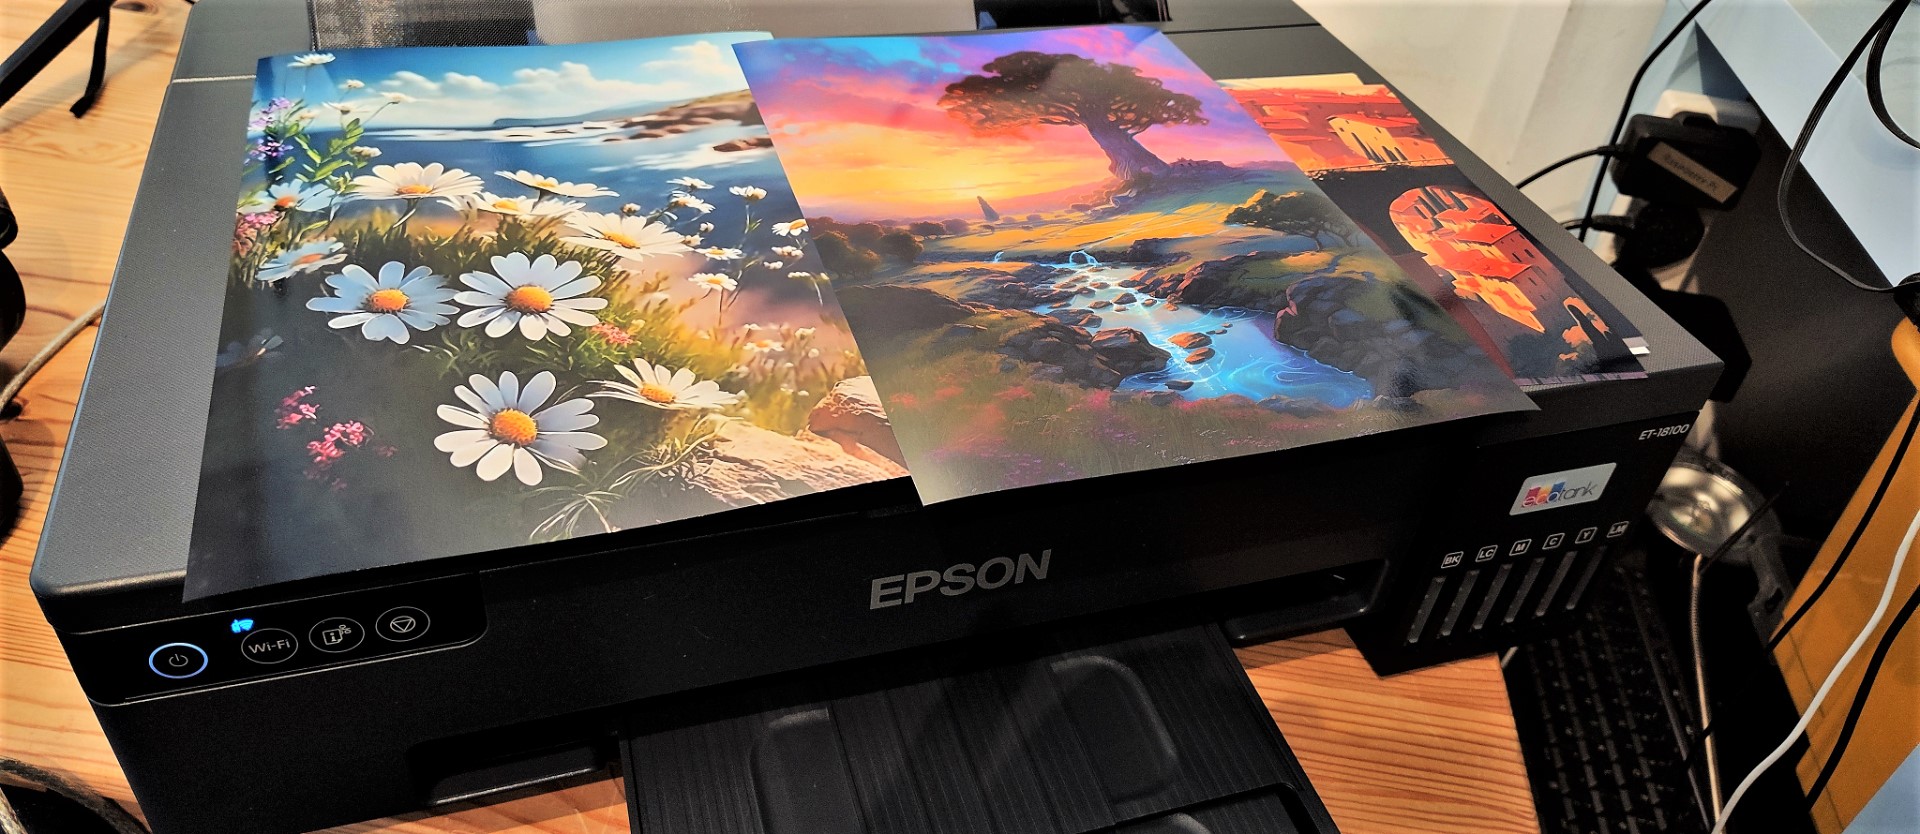 Review of the Epson EcoTank Photo ET 8500 All-in-One Printer